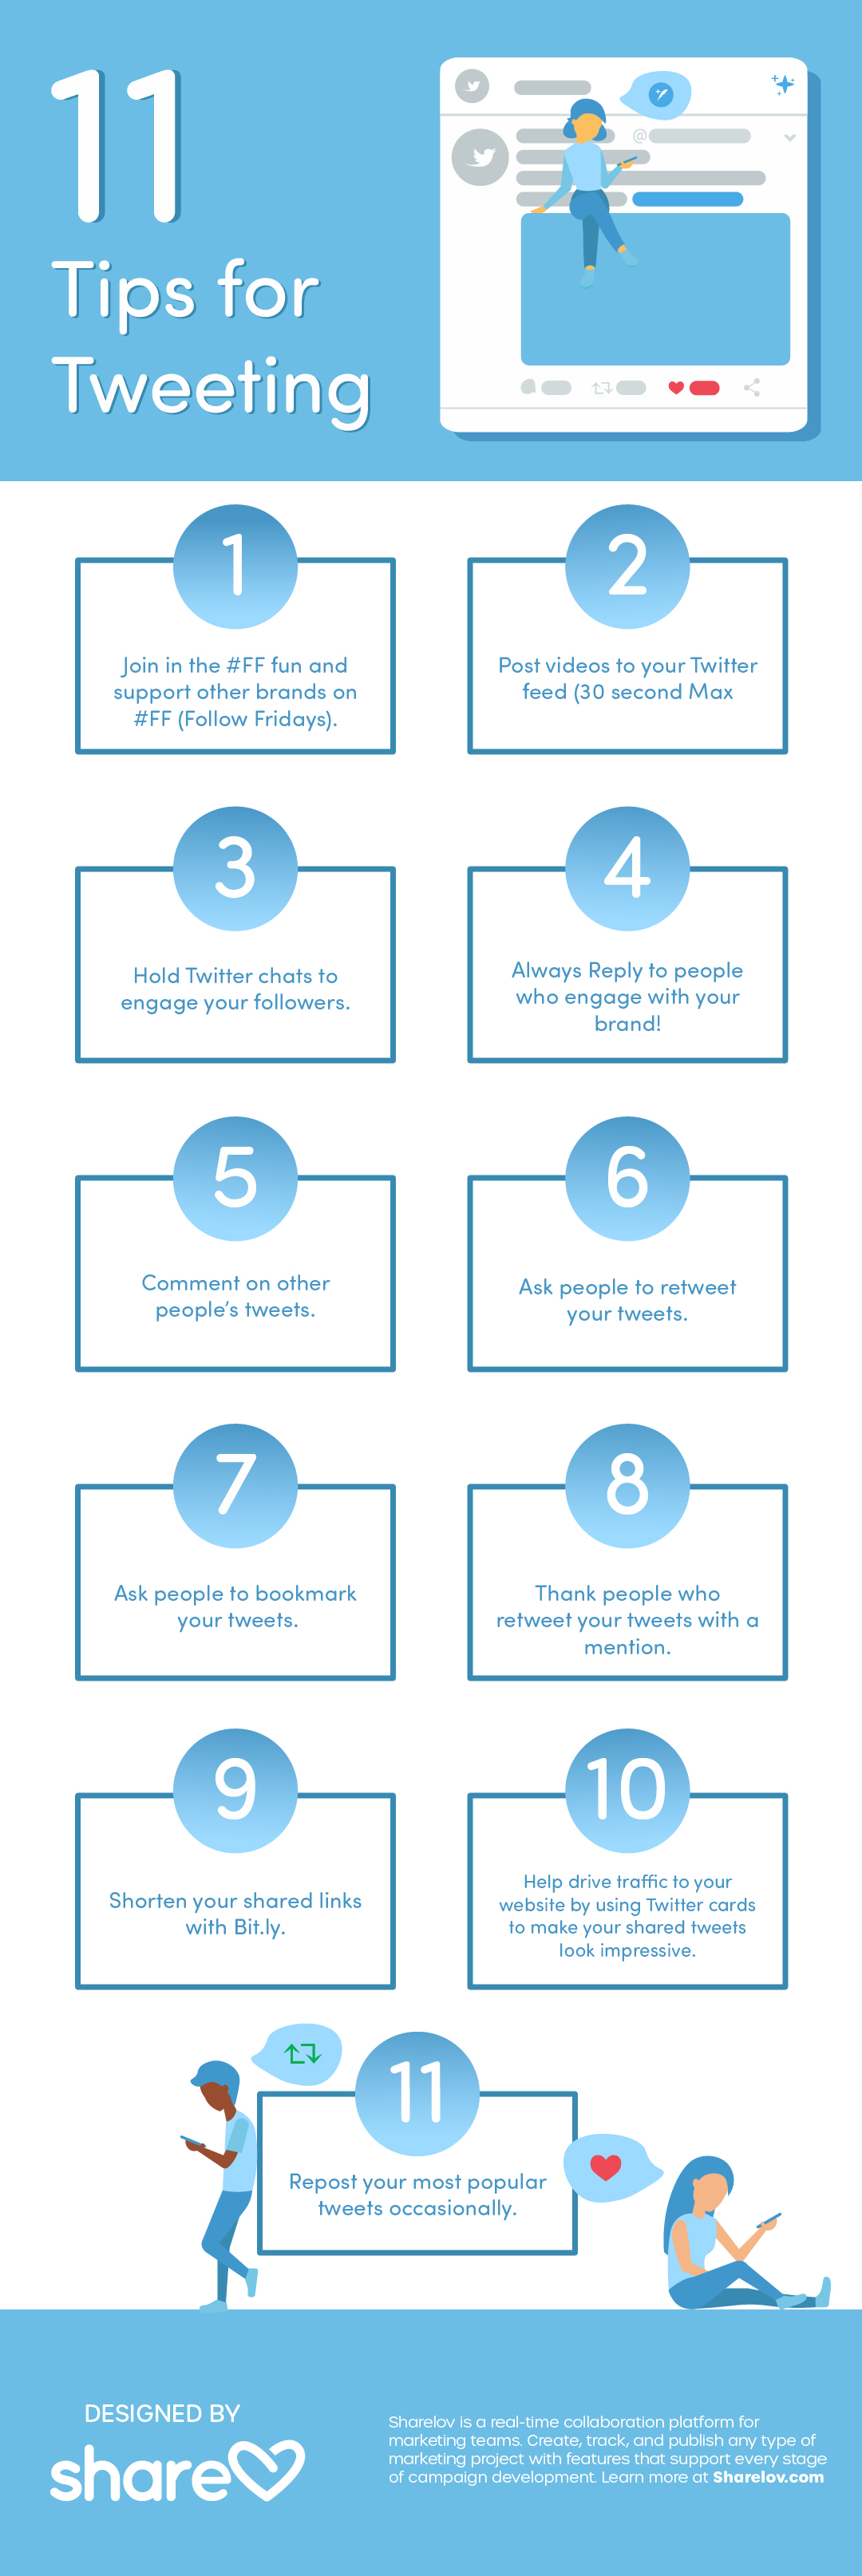 11 Tips for Tweeting